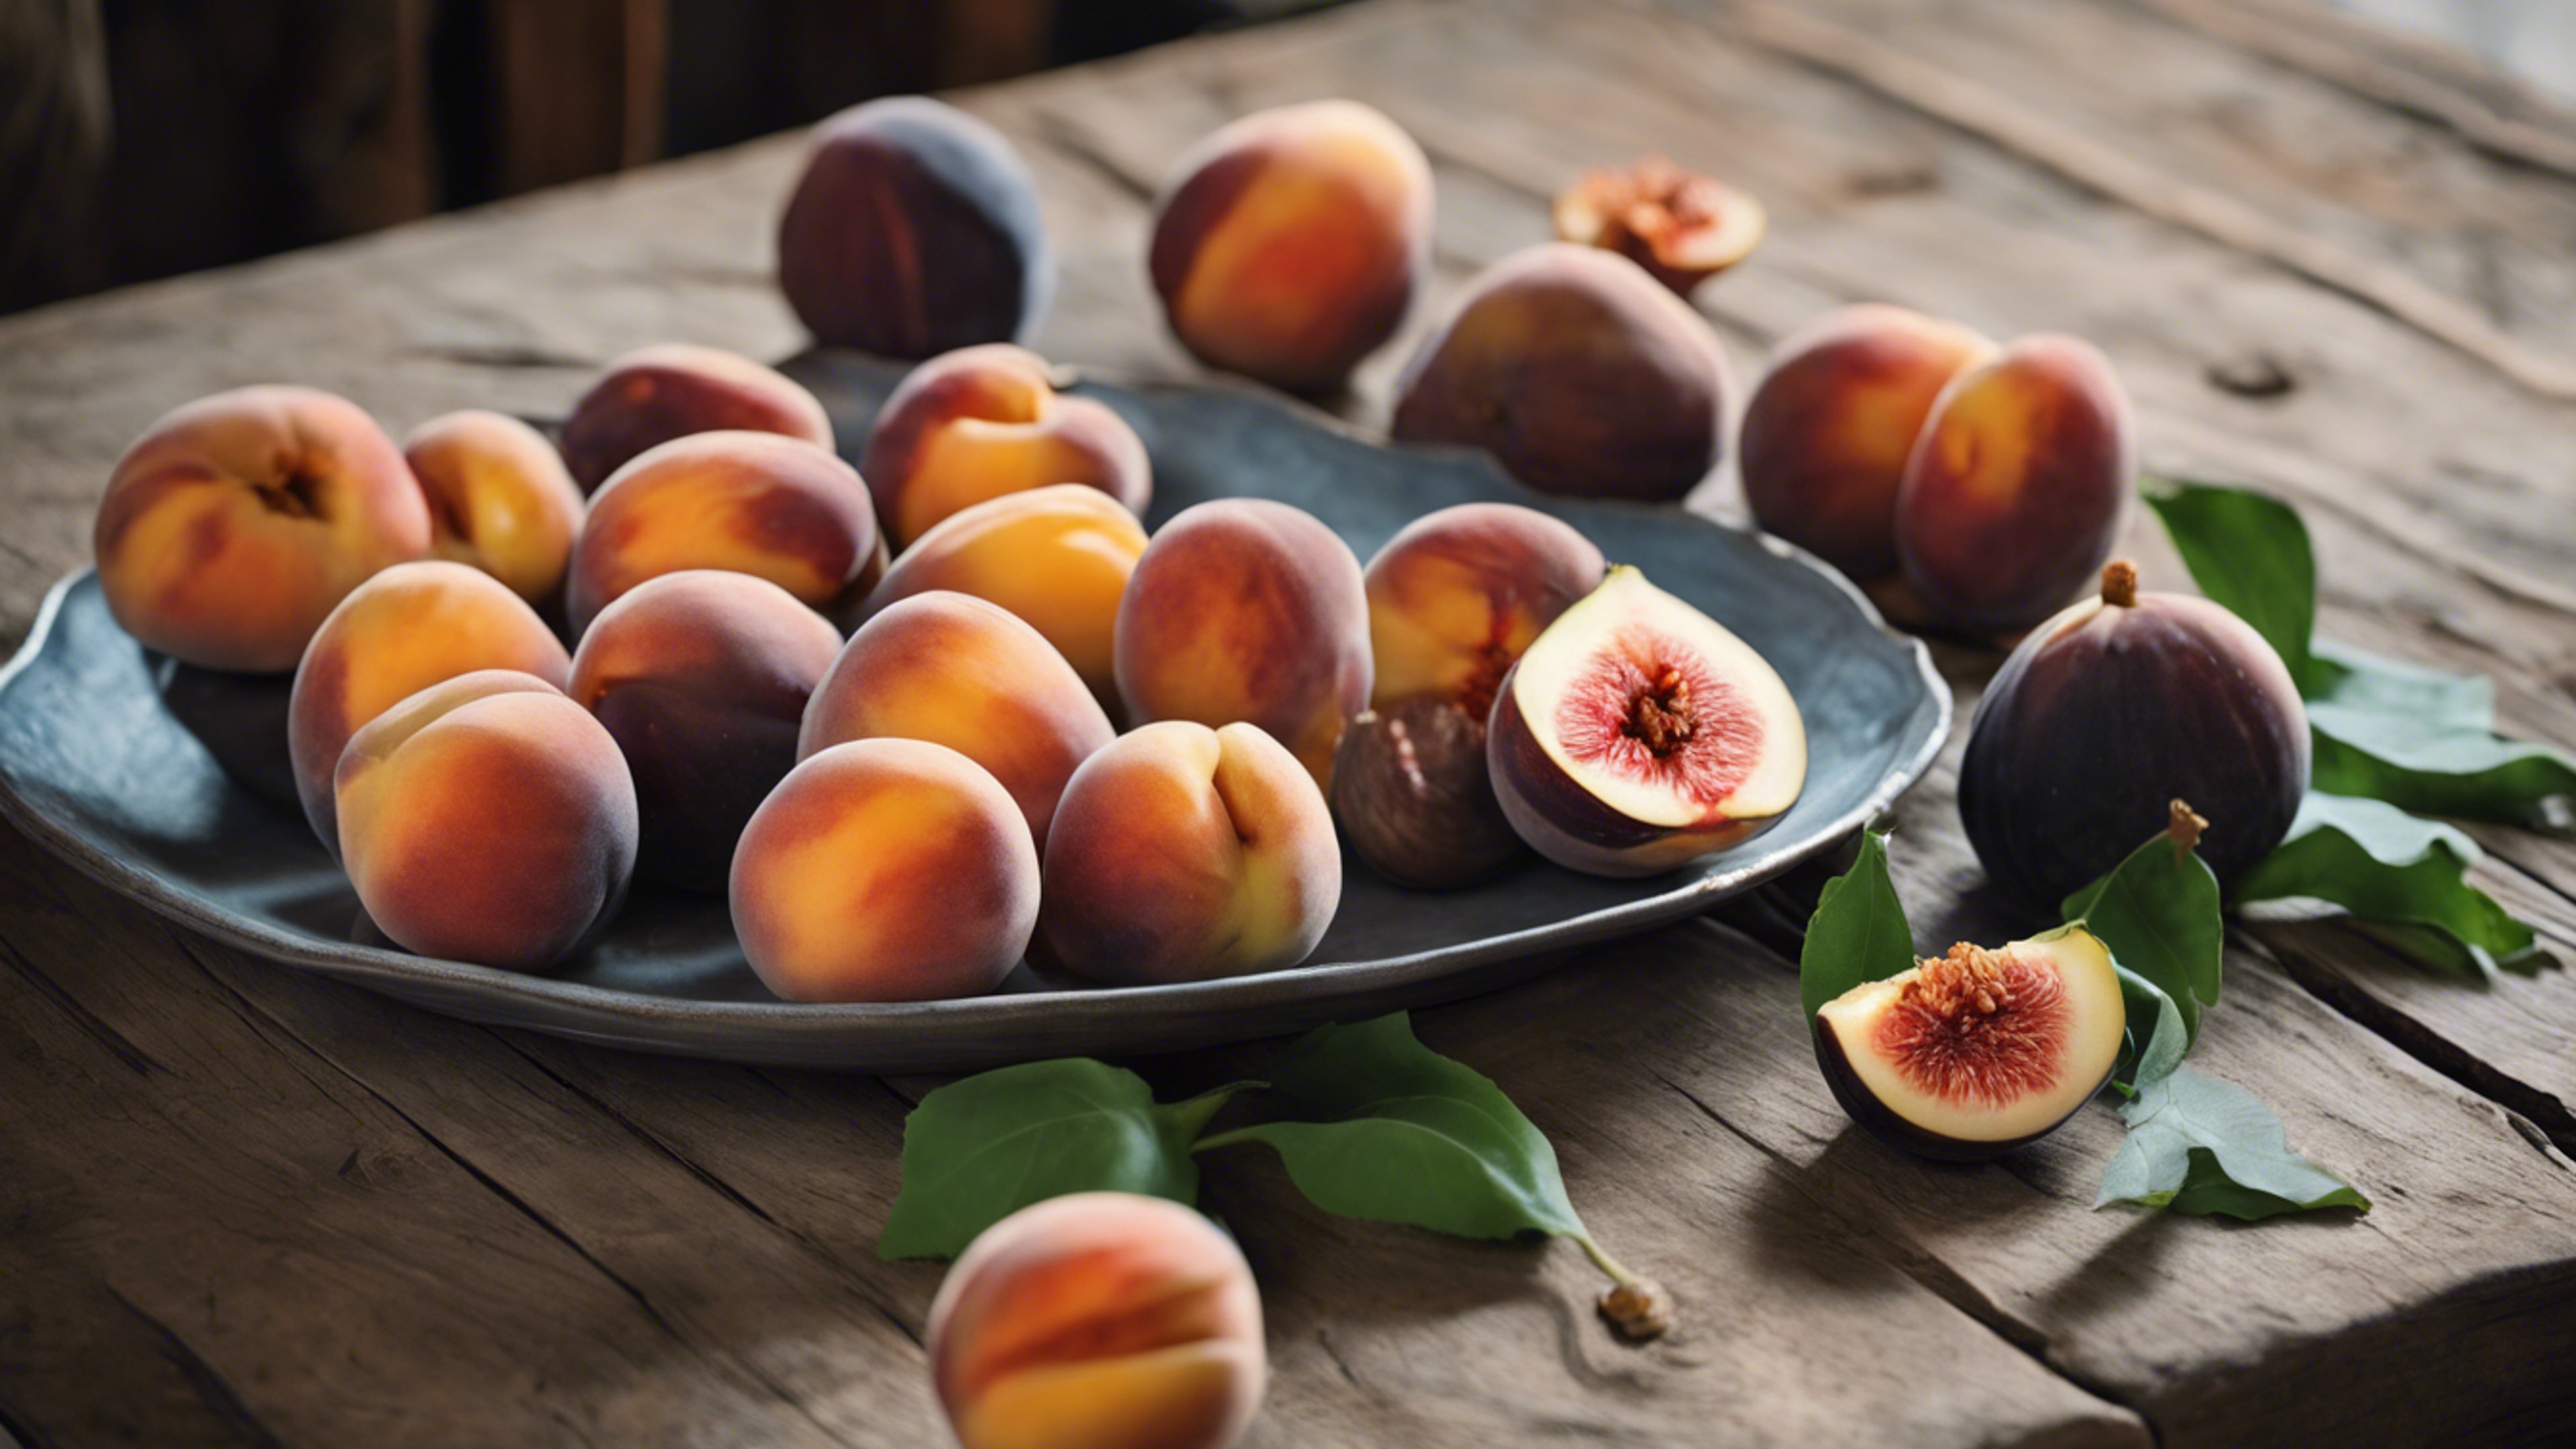 Still life of peaches and figs arranged beautifully on a rustic wooden table. 벽지[c31d3ce6096543dcac89]